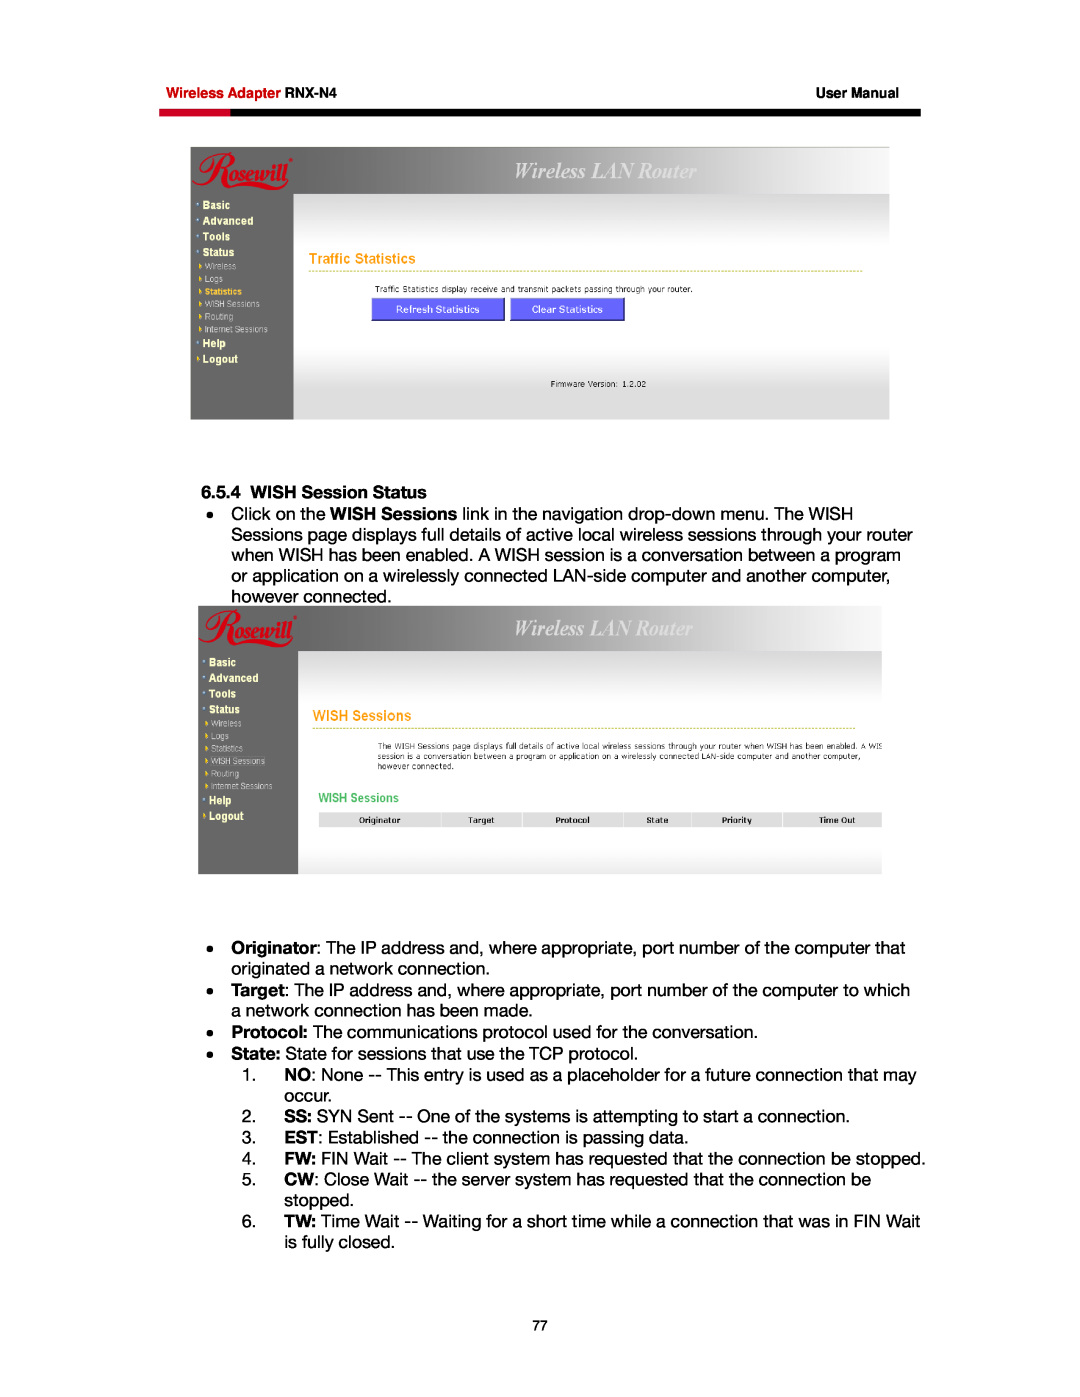 Rosewill RNX-N4 user manual WISH Session Status 